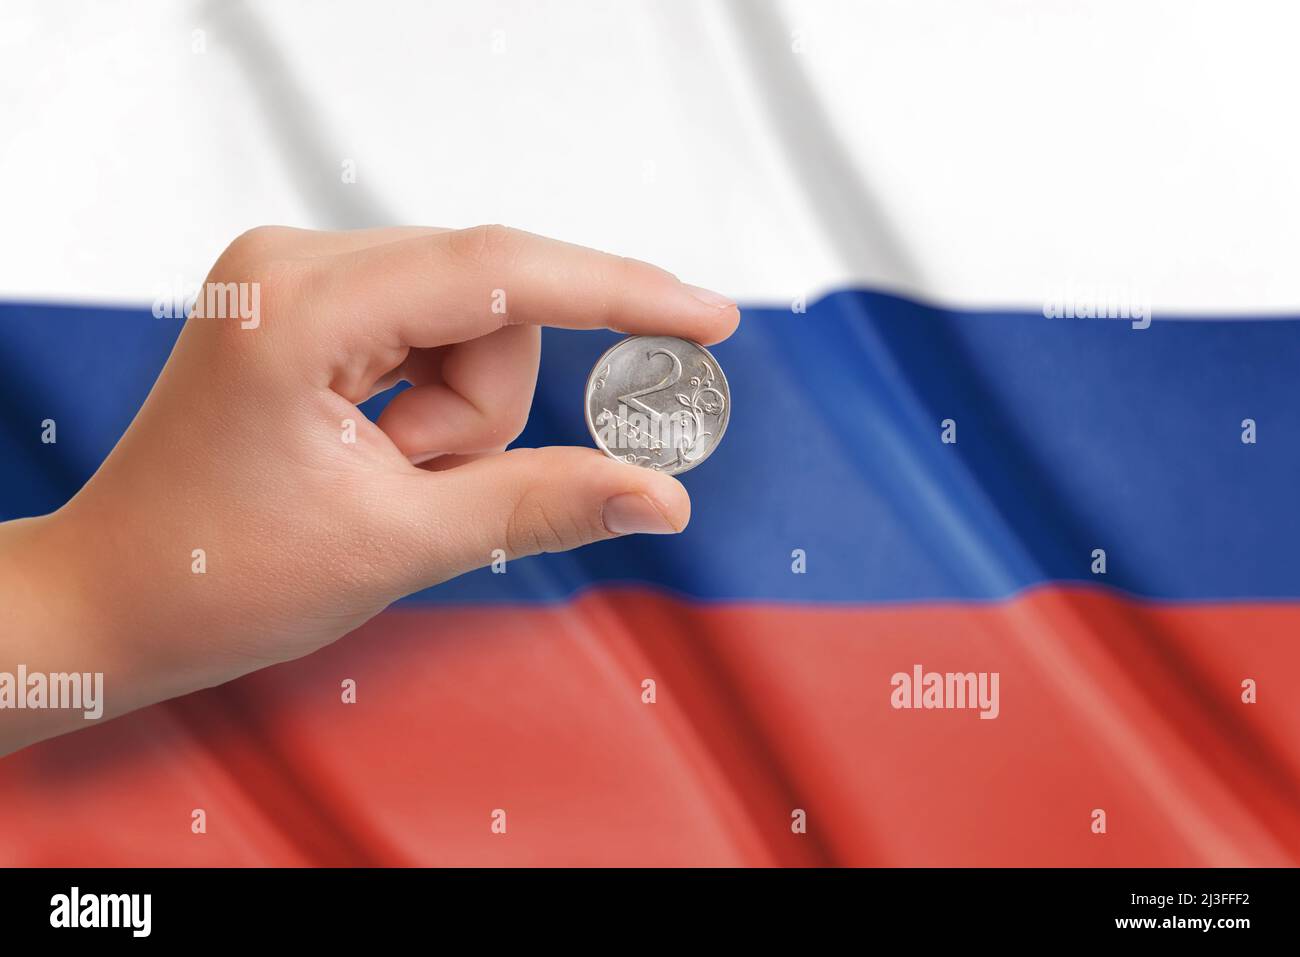 Russian ruble coin in hand. Fag of Russia in the background Stock Photo